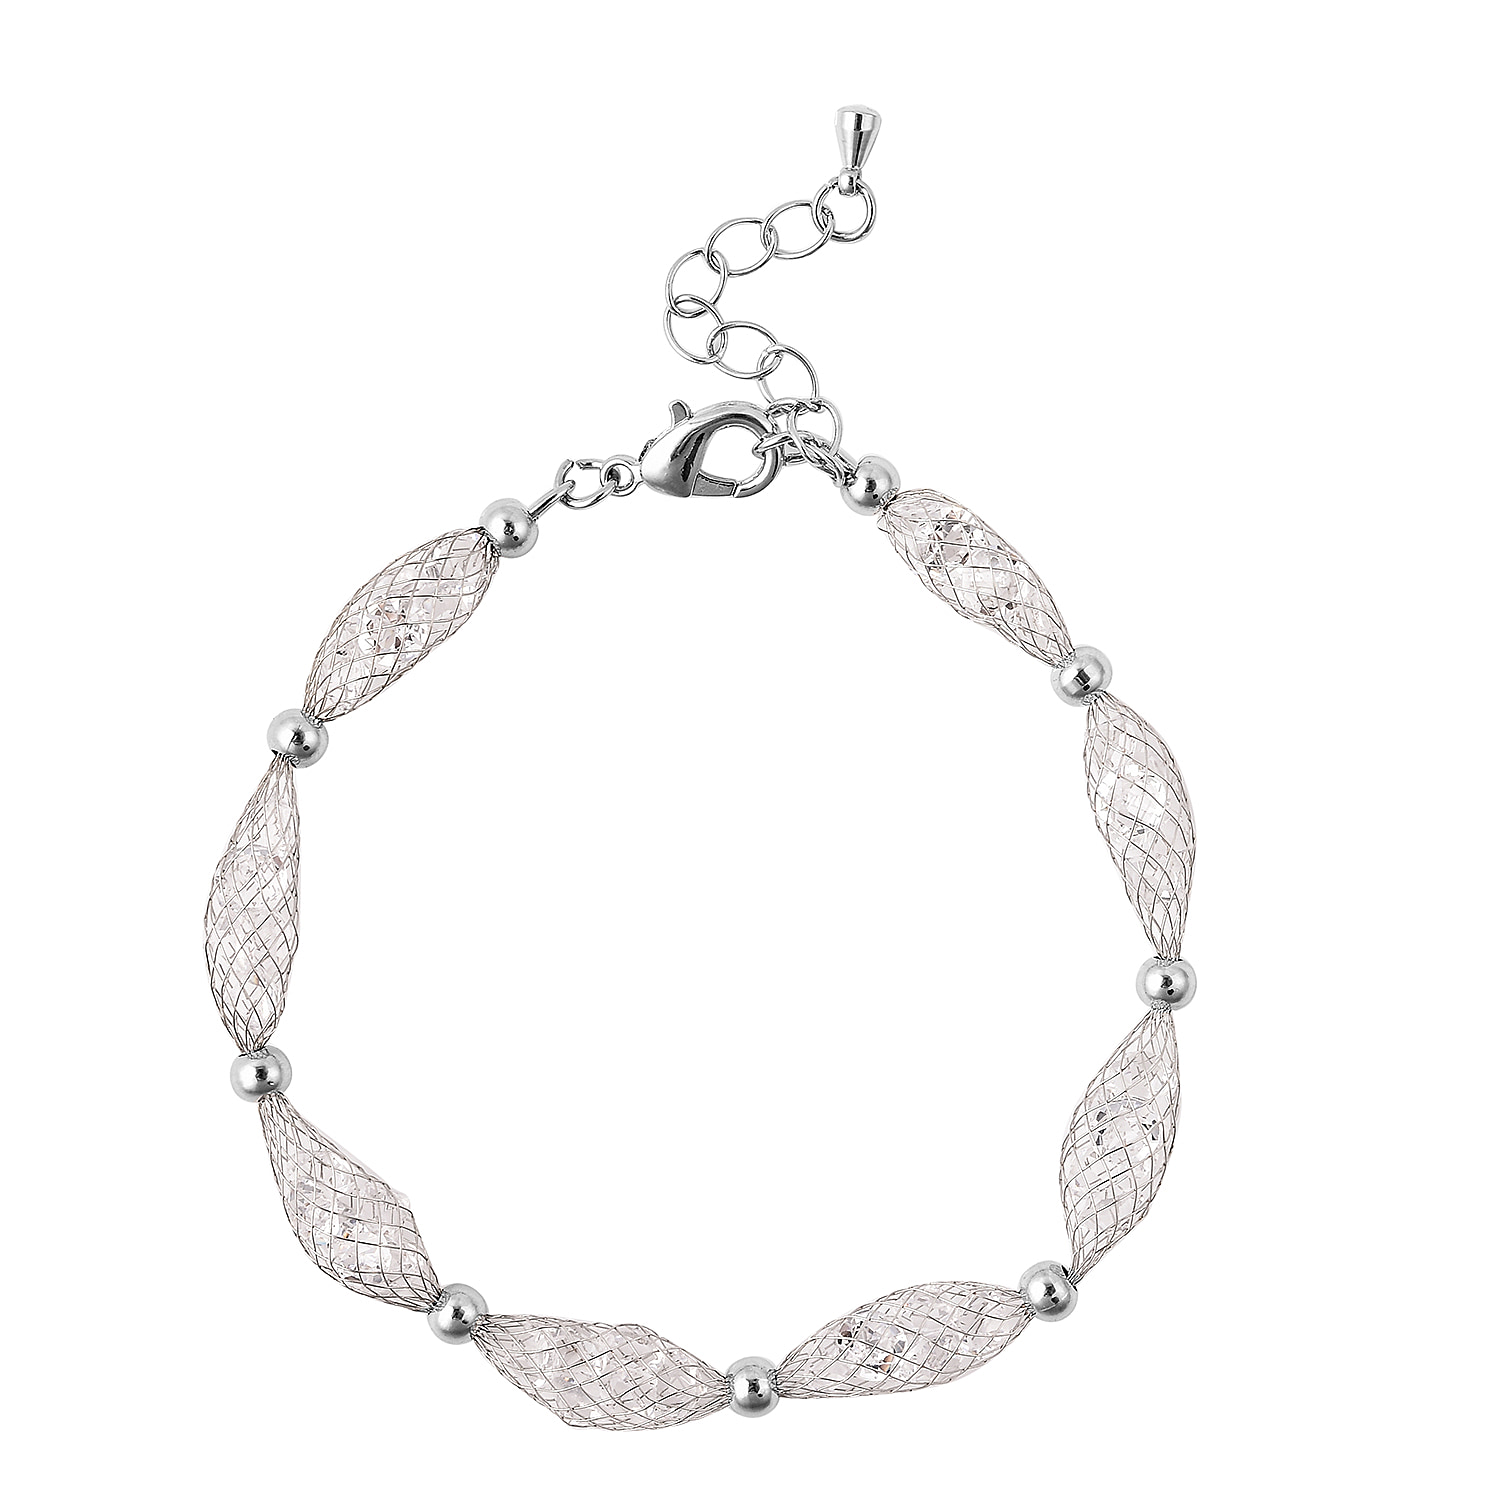 Bracelets | 3mm Austrian Crystal Pattern - The Callaway Collection